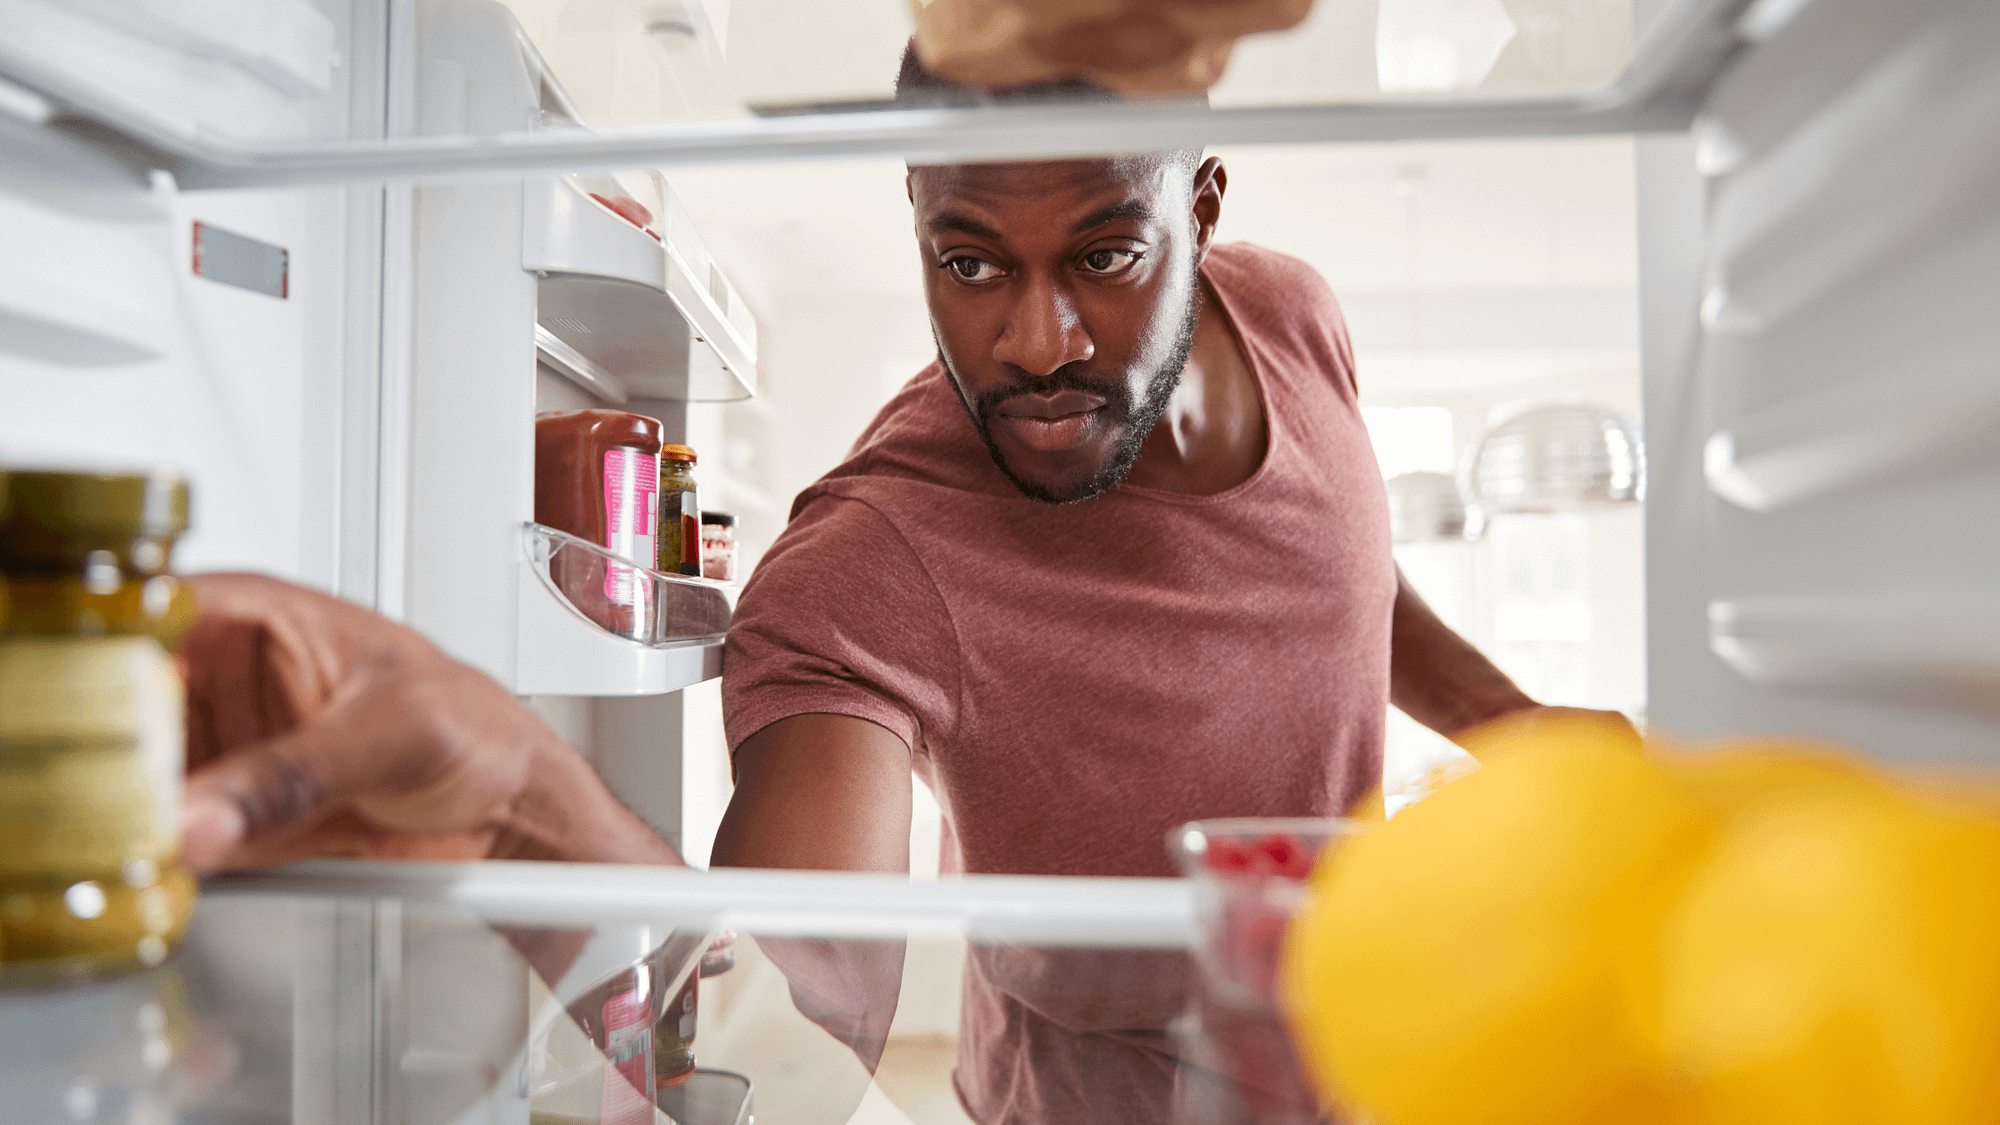 How To Freshen Up a Smelly Refrigerator